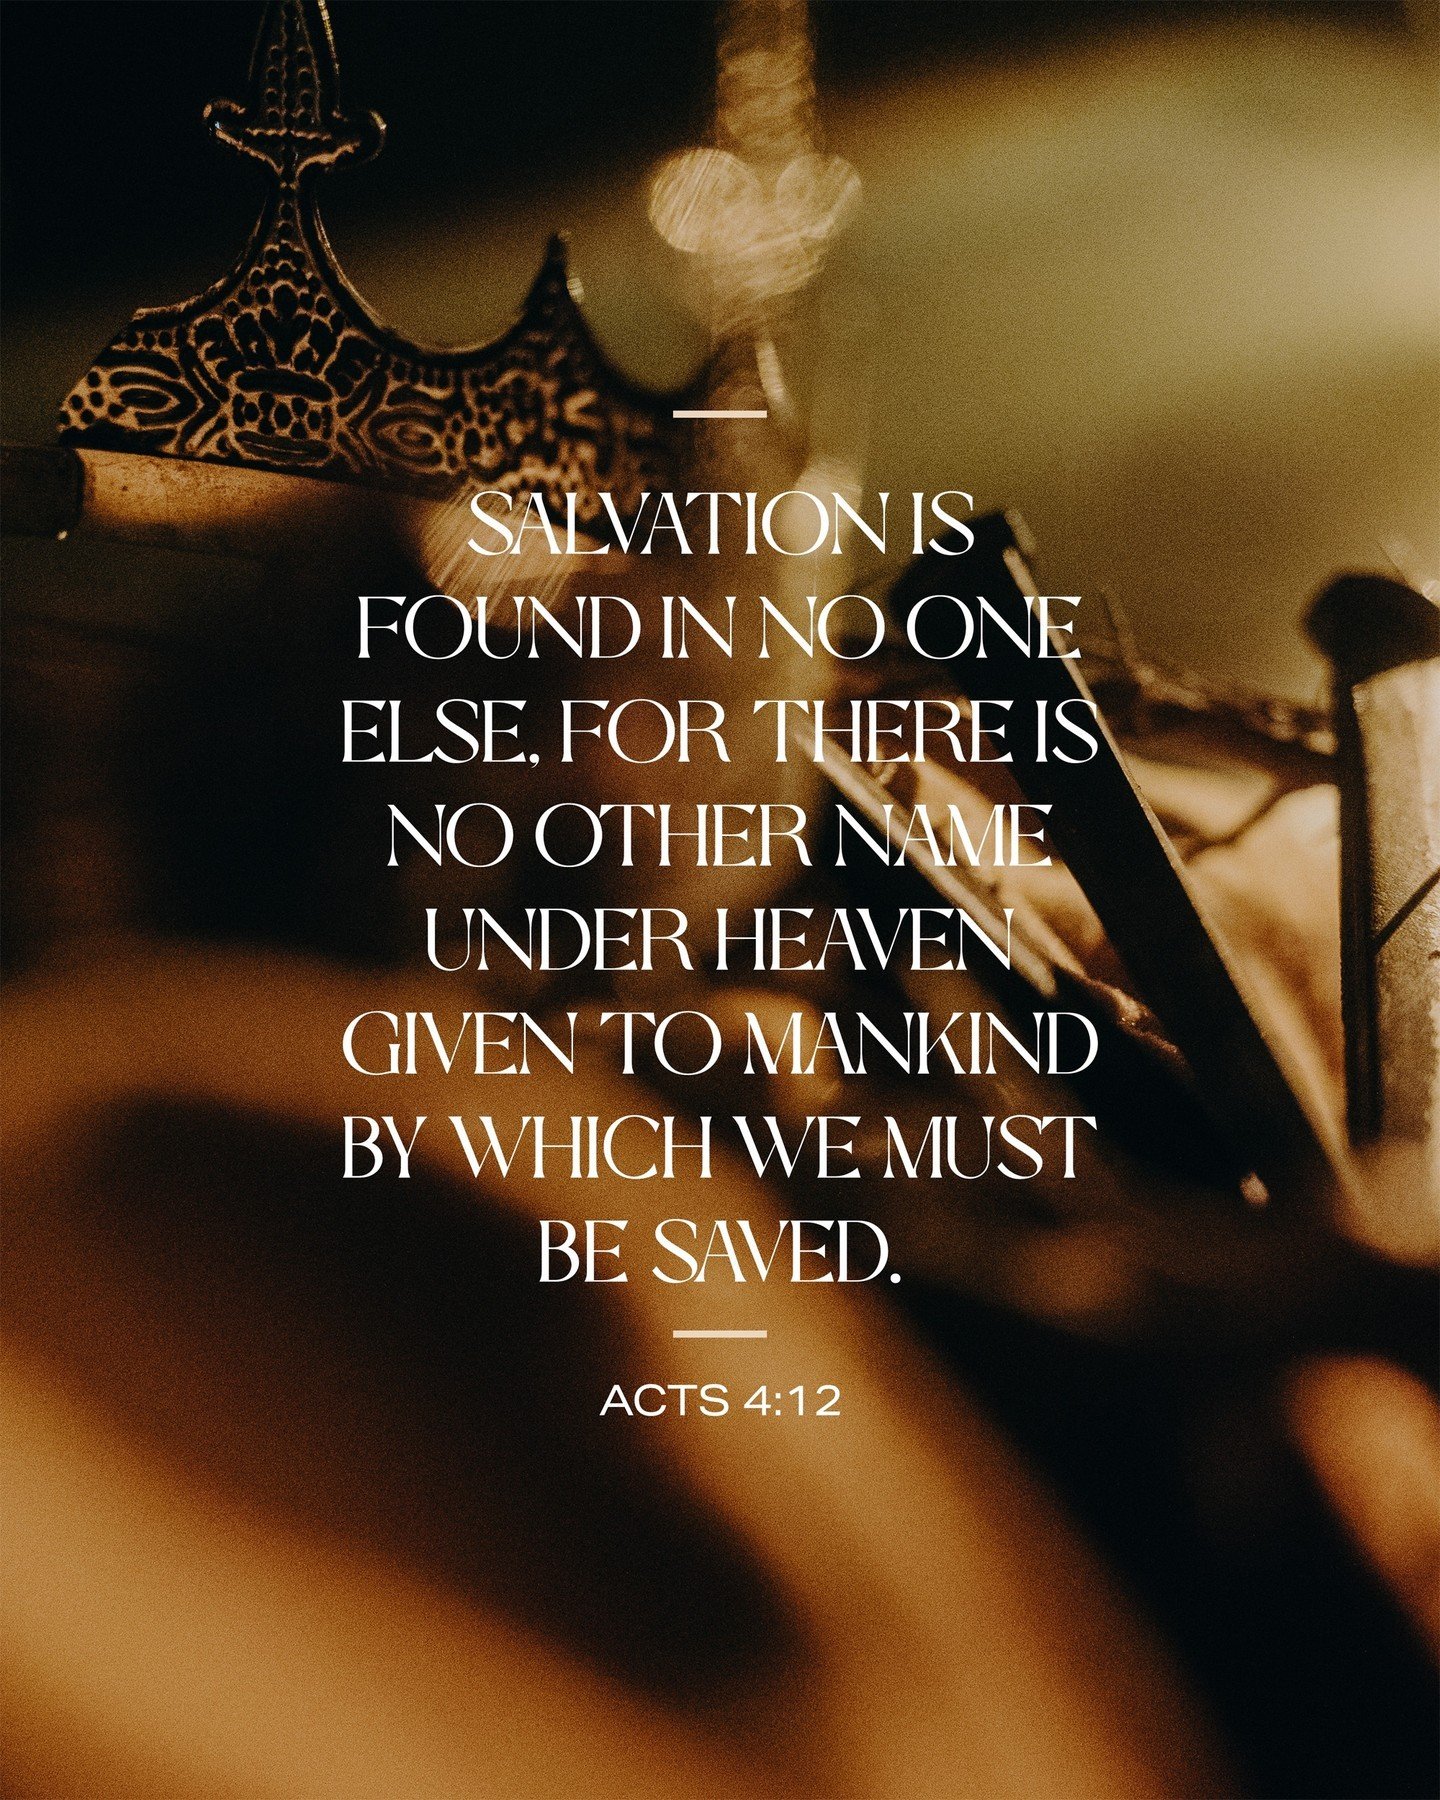 &quot;Salvation is found in no one else, for there is no other name under heaven given to mankind by which we must be saved.&quot; - Acts 4:12
.
.
.
#church #god #morning #jesus #christ #love #christian #worship #bible #acts